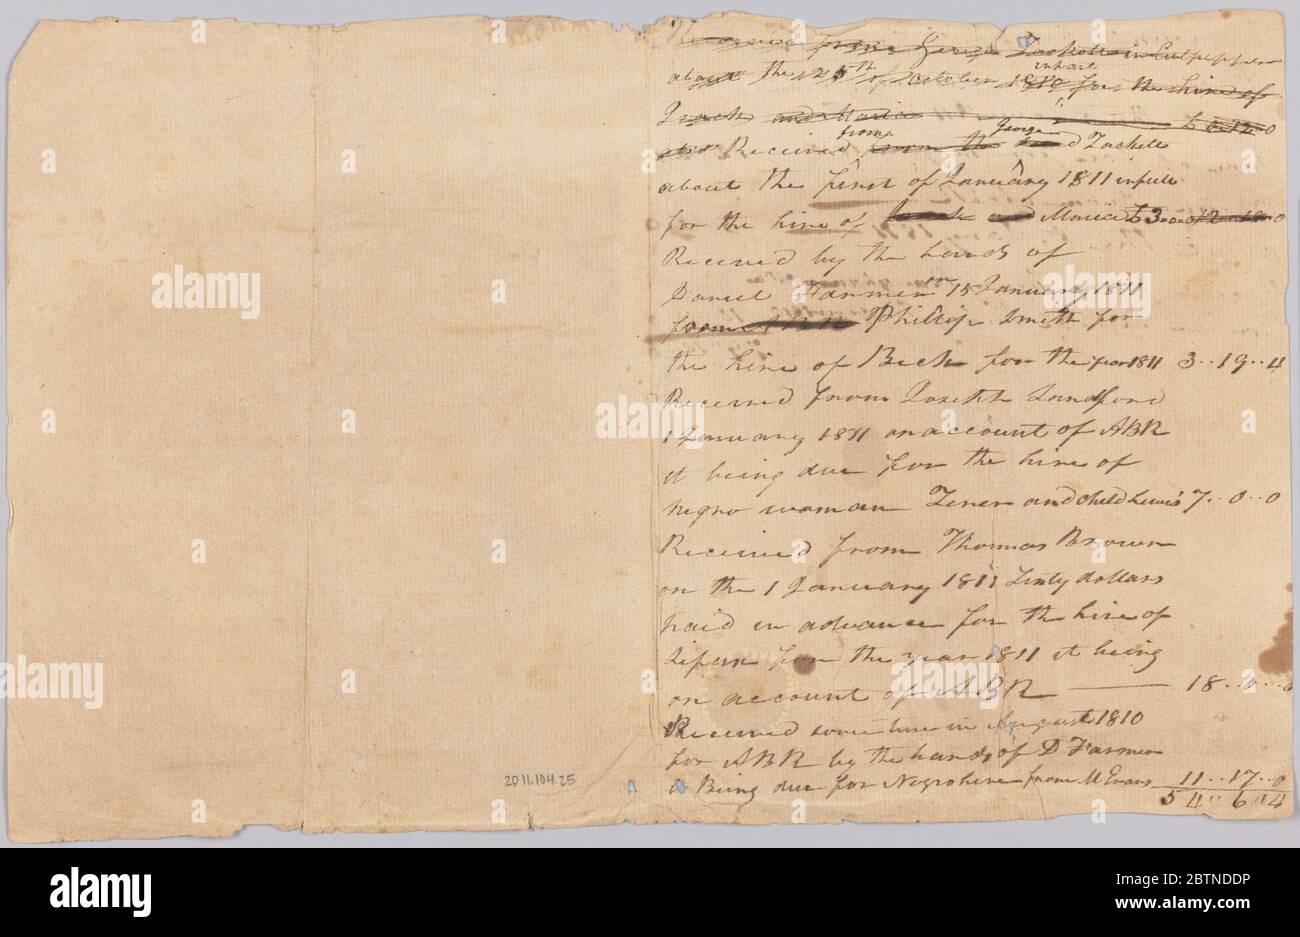 Accounting record for the Rouzee family with notes on hires of enslaved persons. This document is from a collection of financial papers related to the plantation operations of several generations of the Rouzee Family in Essex County, Virginia. Stock Photo